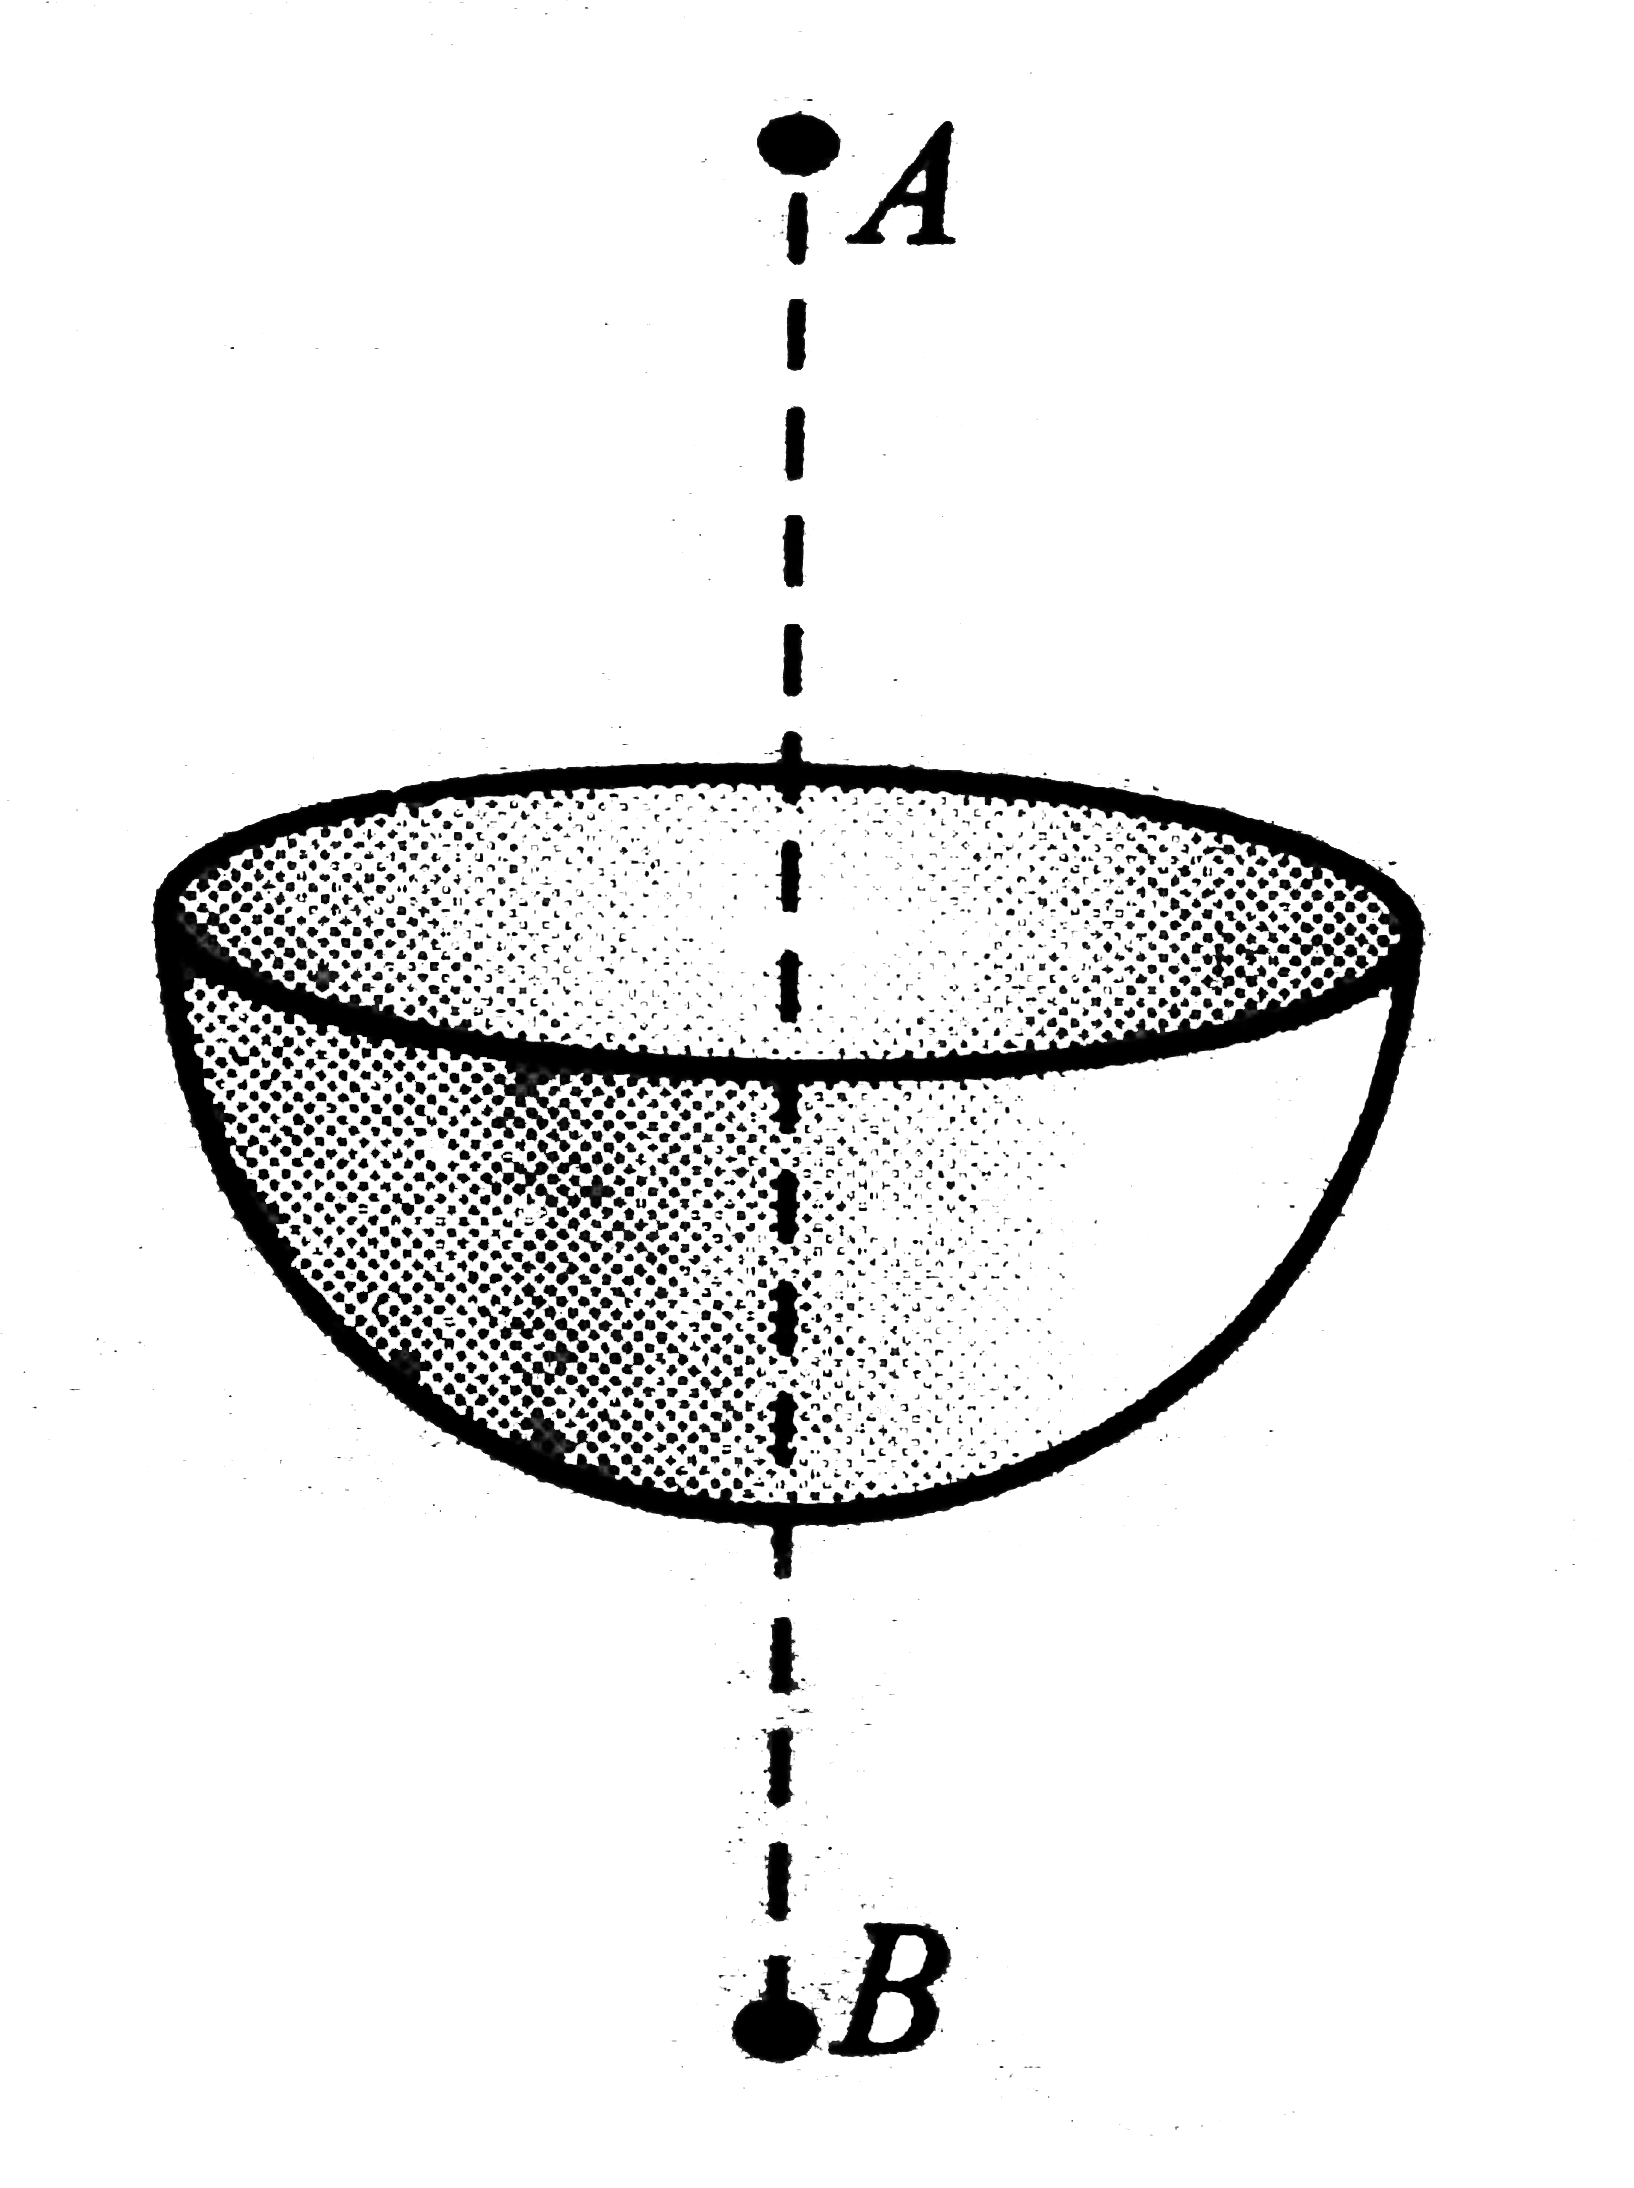 Figure shows a uniformly charged hemisphere of radius R. It has a volume charge density rho. If the electric field at a point 2R, above the its center is E, then what is the electric field at the point 2R below its center?